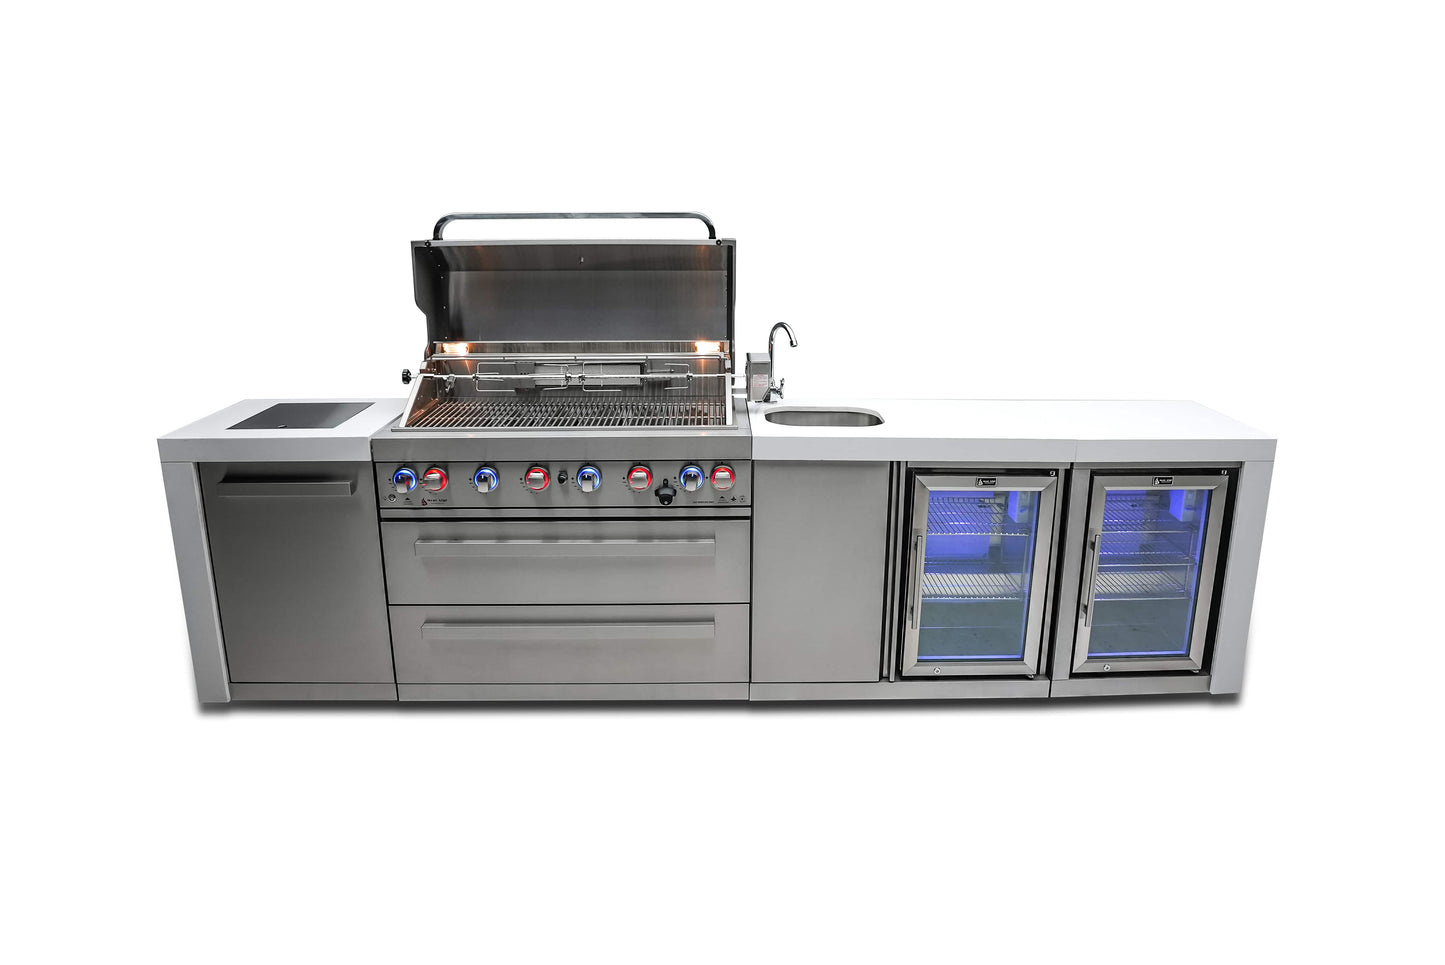 Mont Alpi Deluxe Island Grill with Beverage Centre, Refrigerator Cabinet, Infrared Side Burner, and Rotisserie Kit - MAi805-DBEVFC